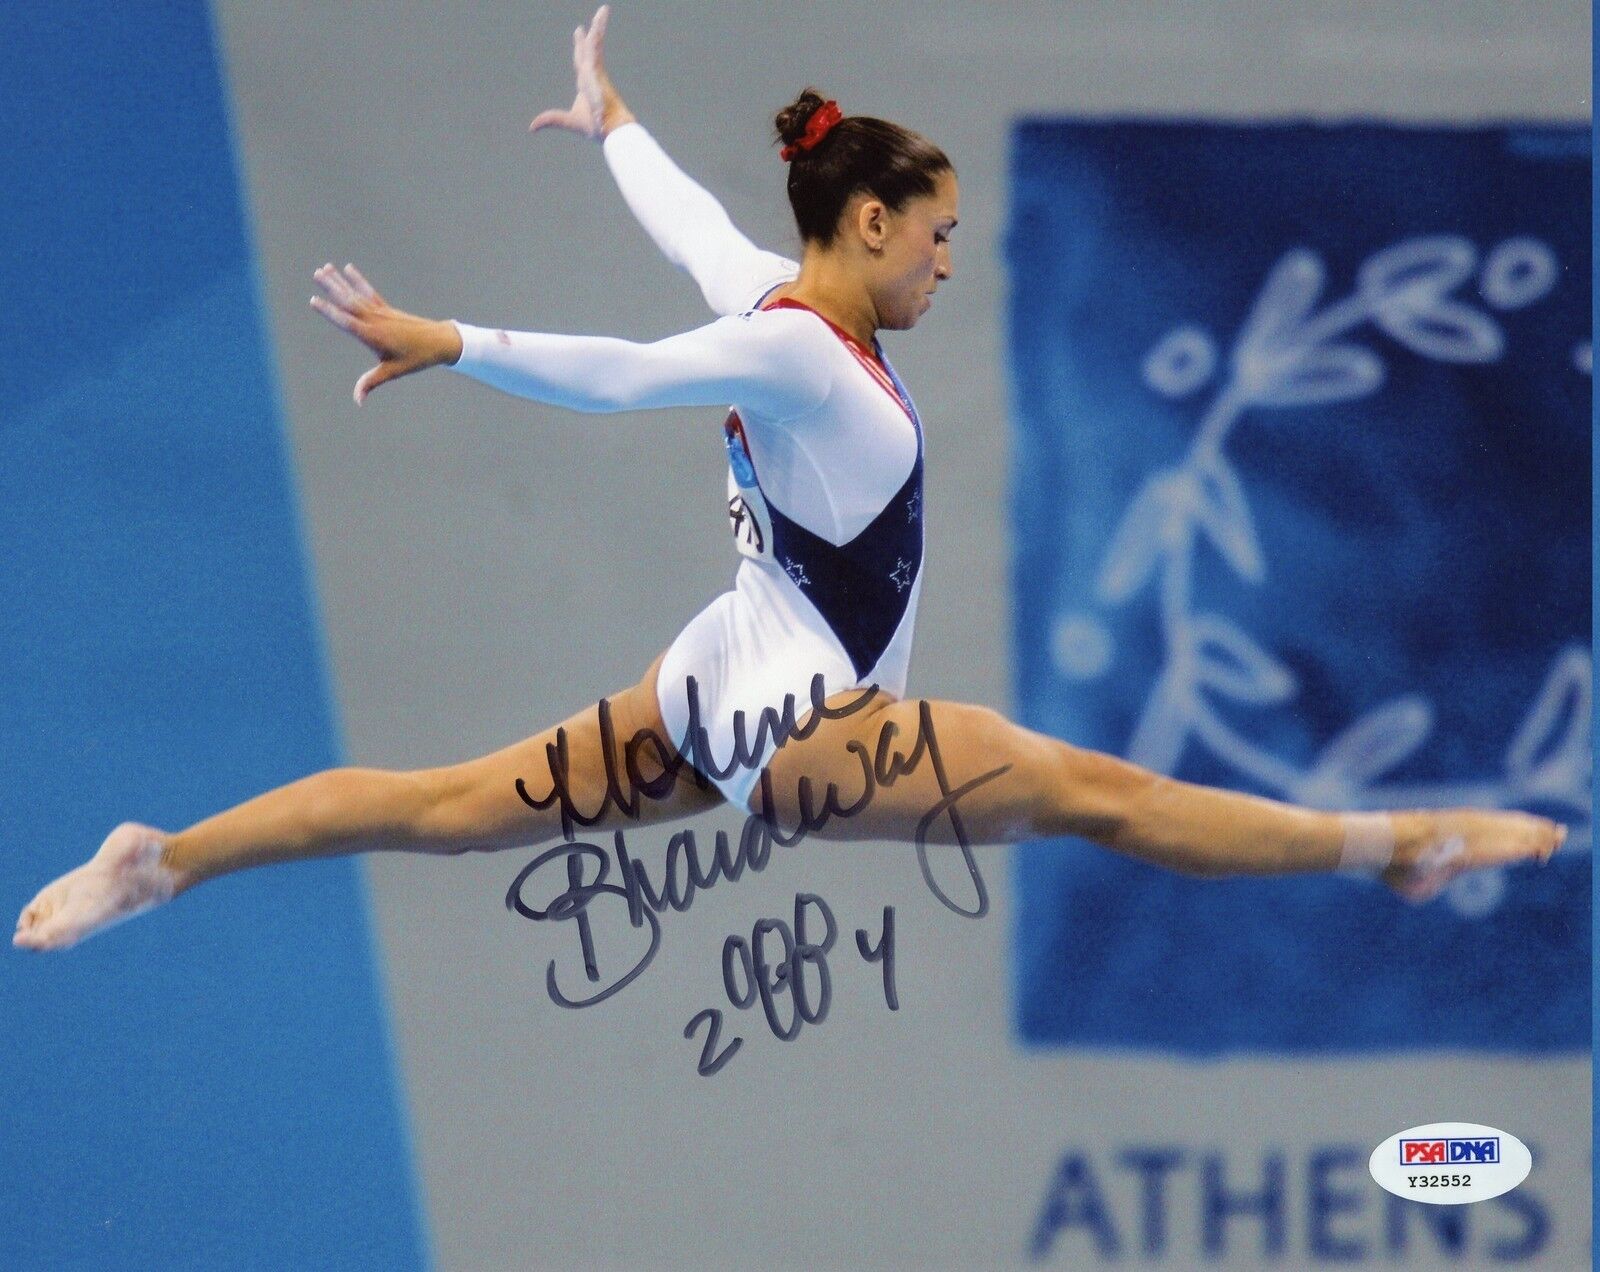 Mohini Bhardwaj 8x10 Photo Poster painting Signed Autographed Auto PSA DNA Olympis Gymnast Gold